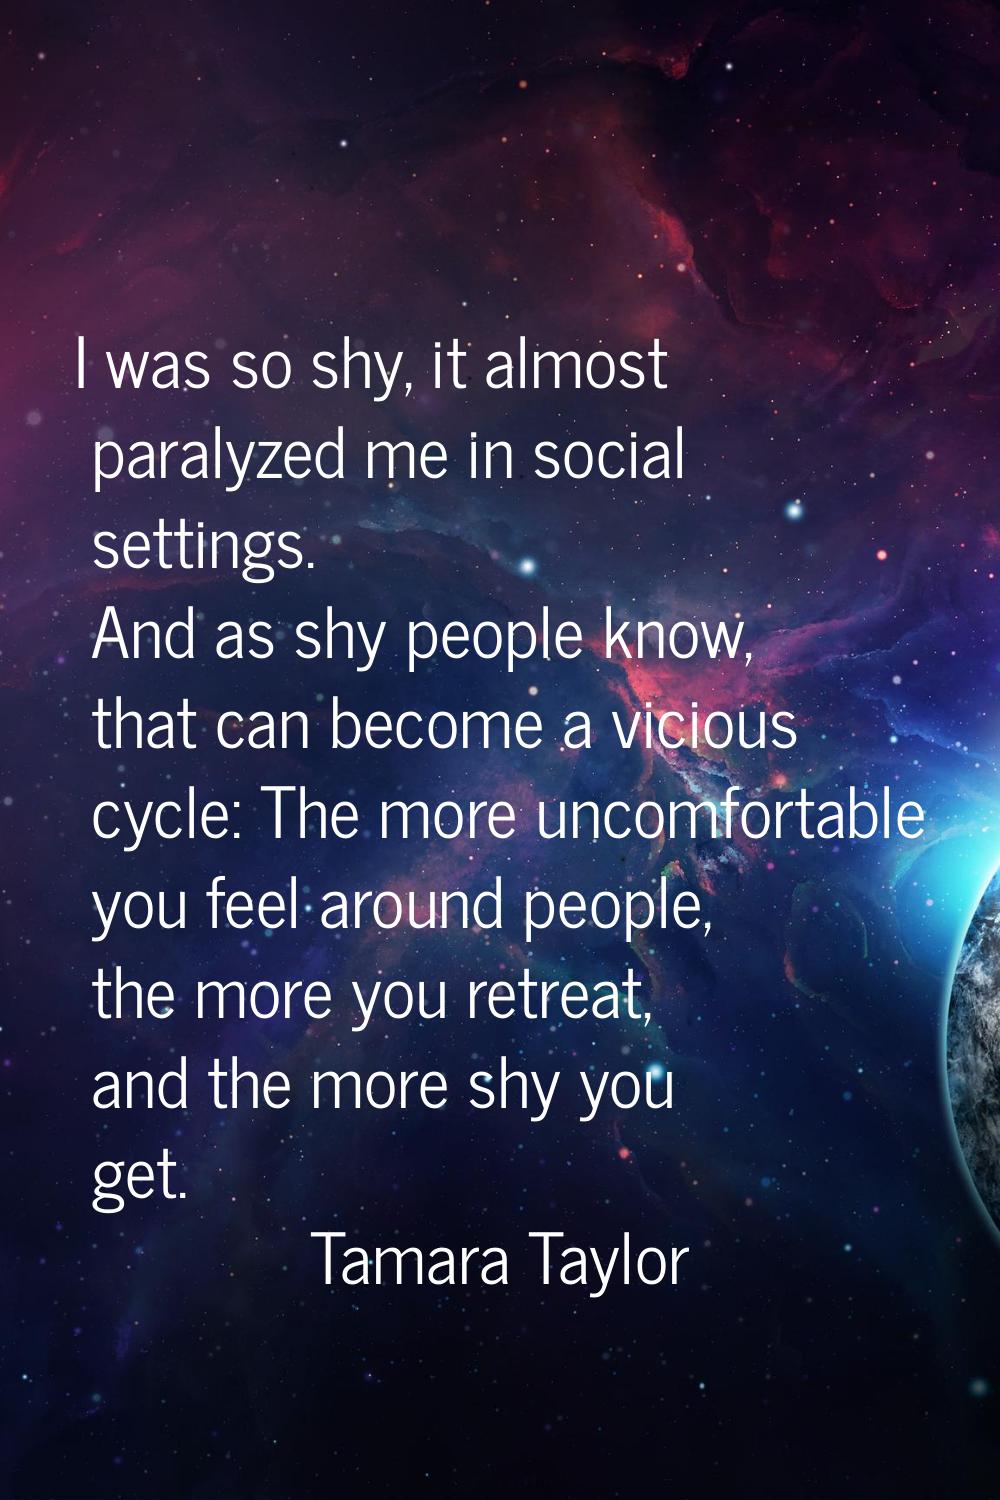 I was so shy, it almost paralyzed me in social settings. And as shy people know, that can become a 